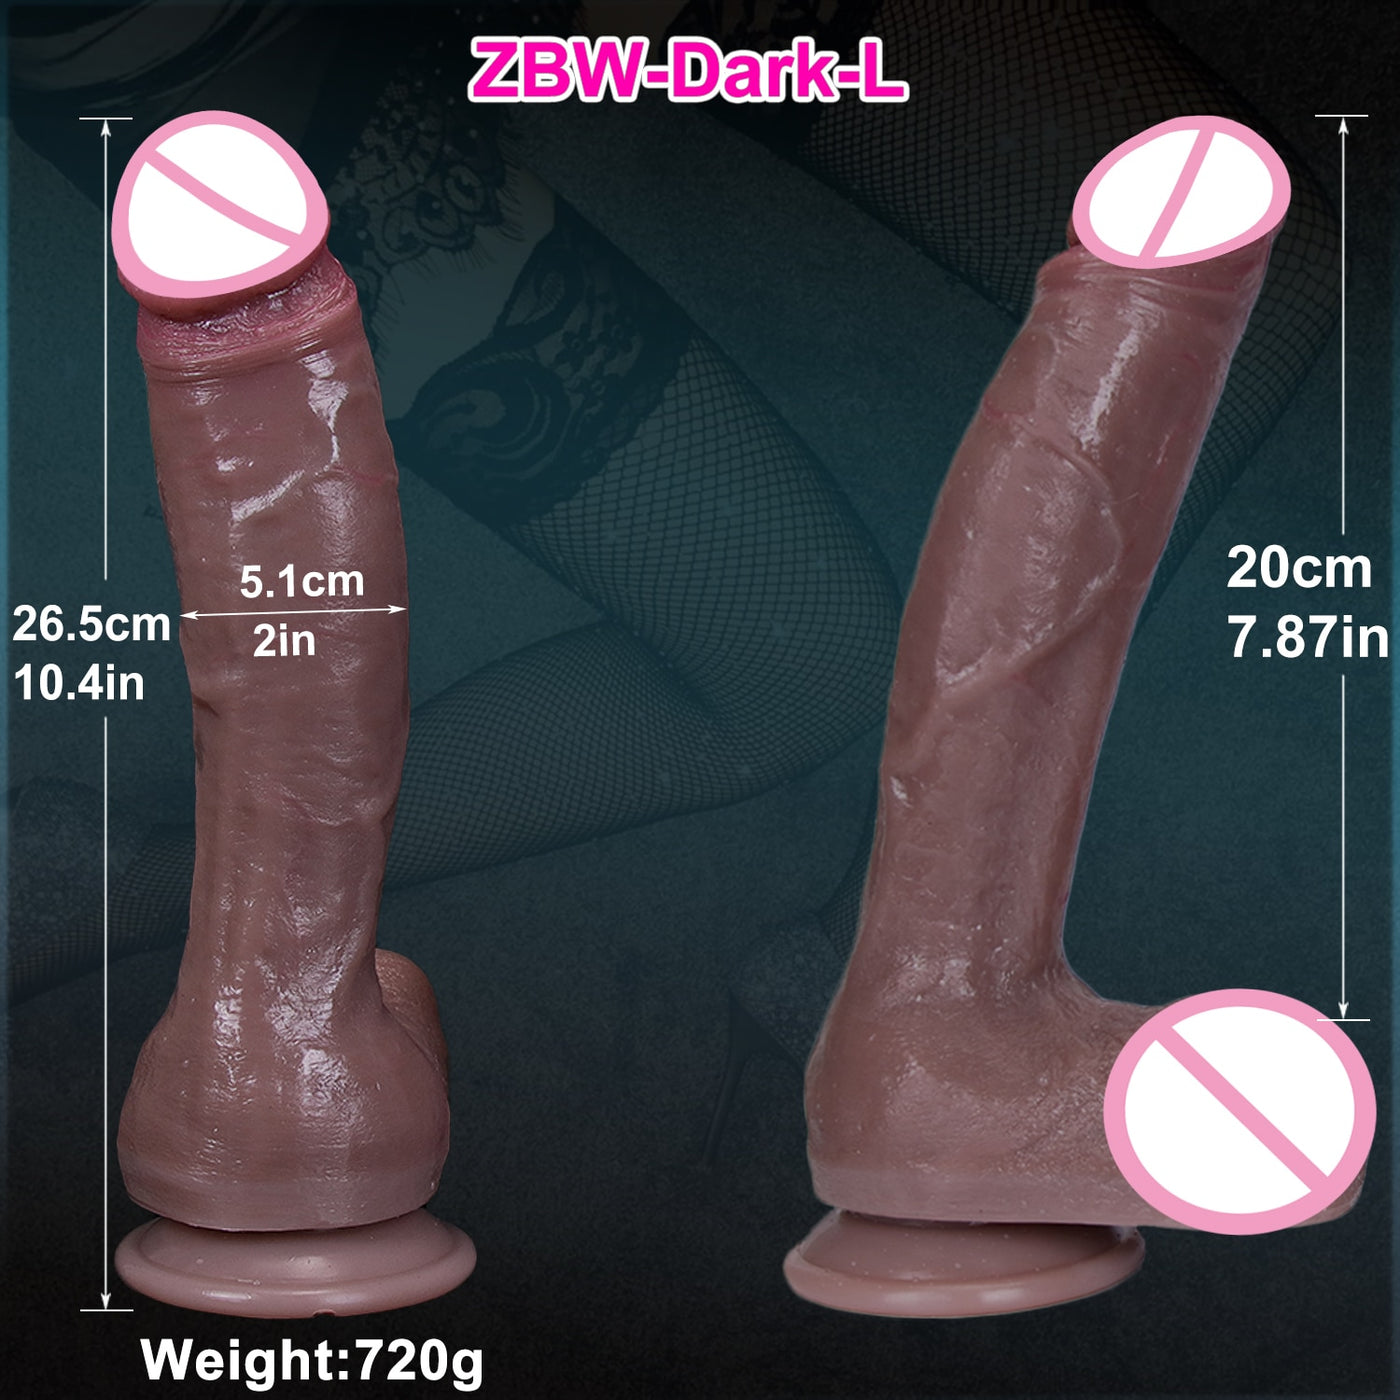 Realistic Looking - Huge Dildo with Suction Cup Various Sizes and Colors.